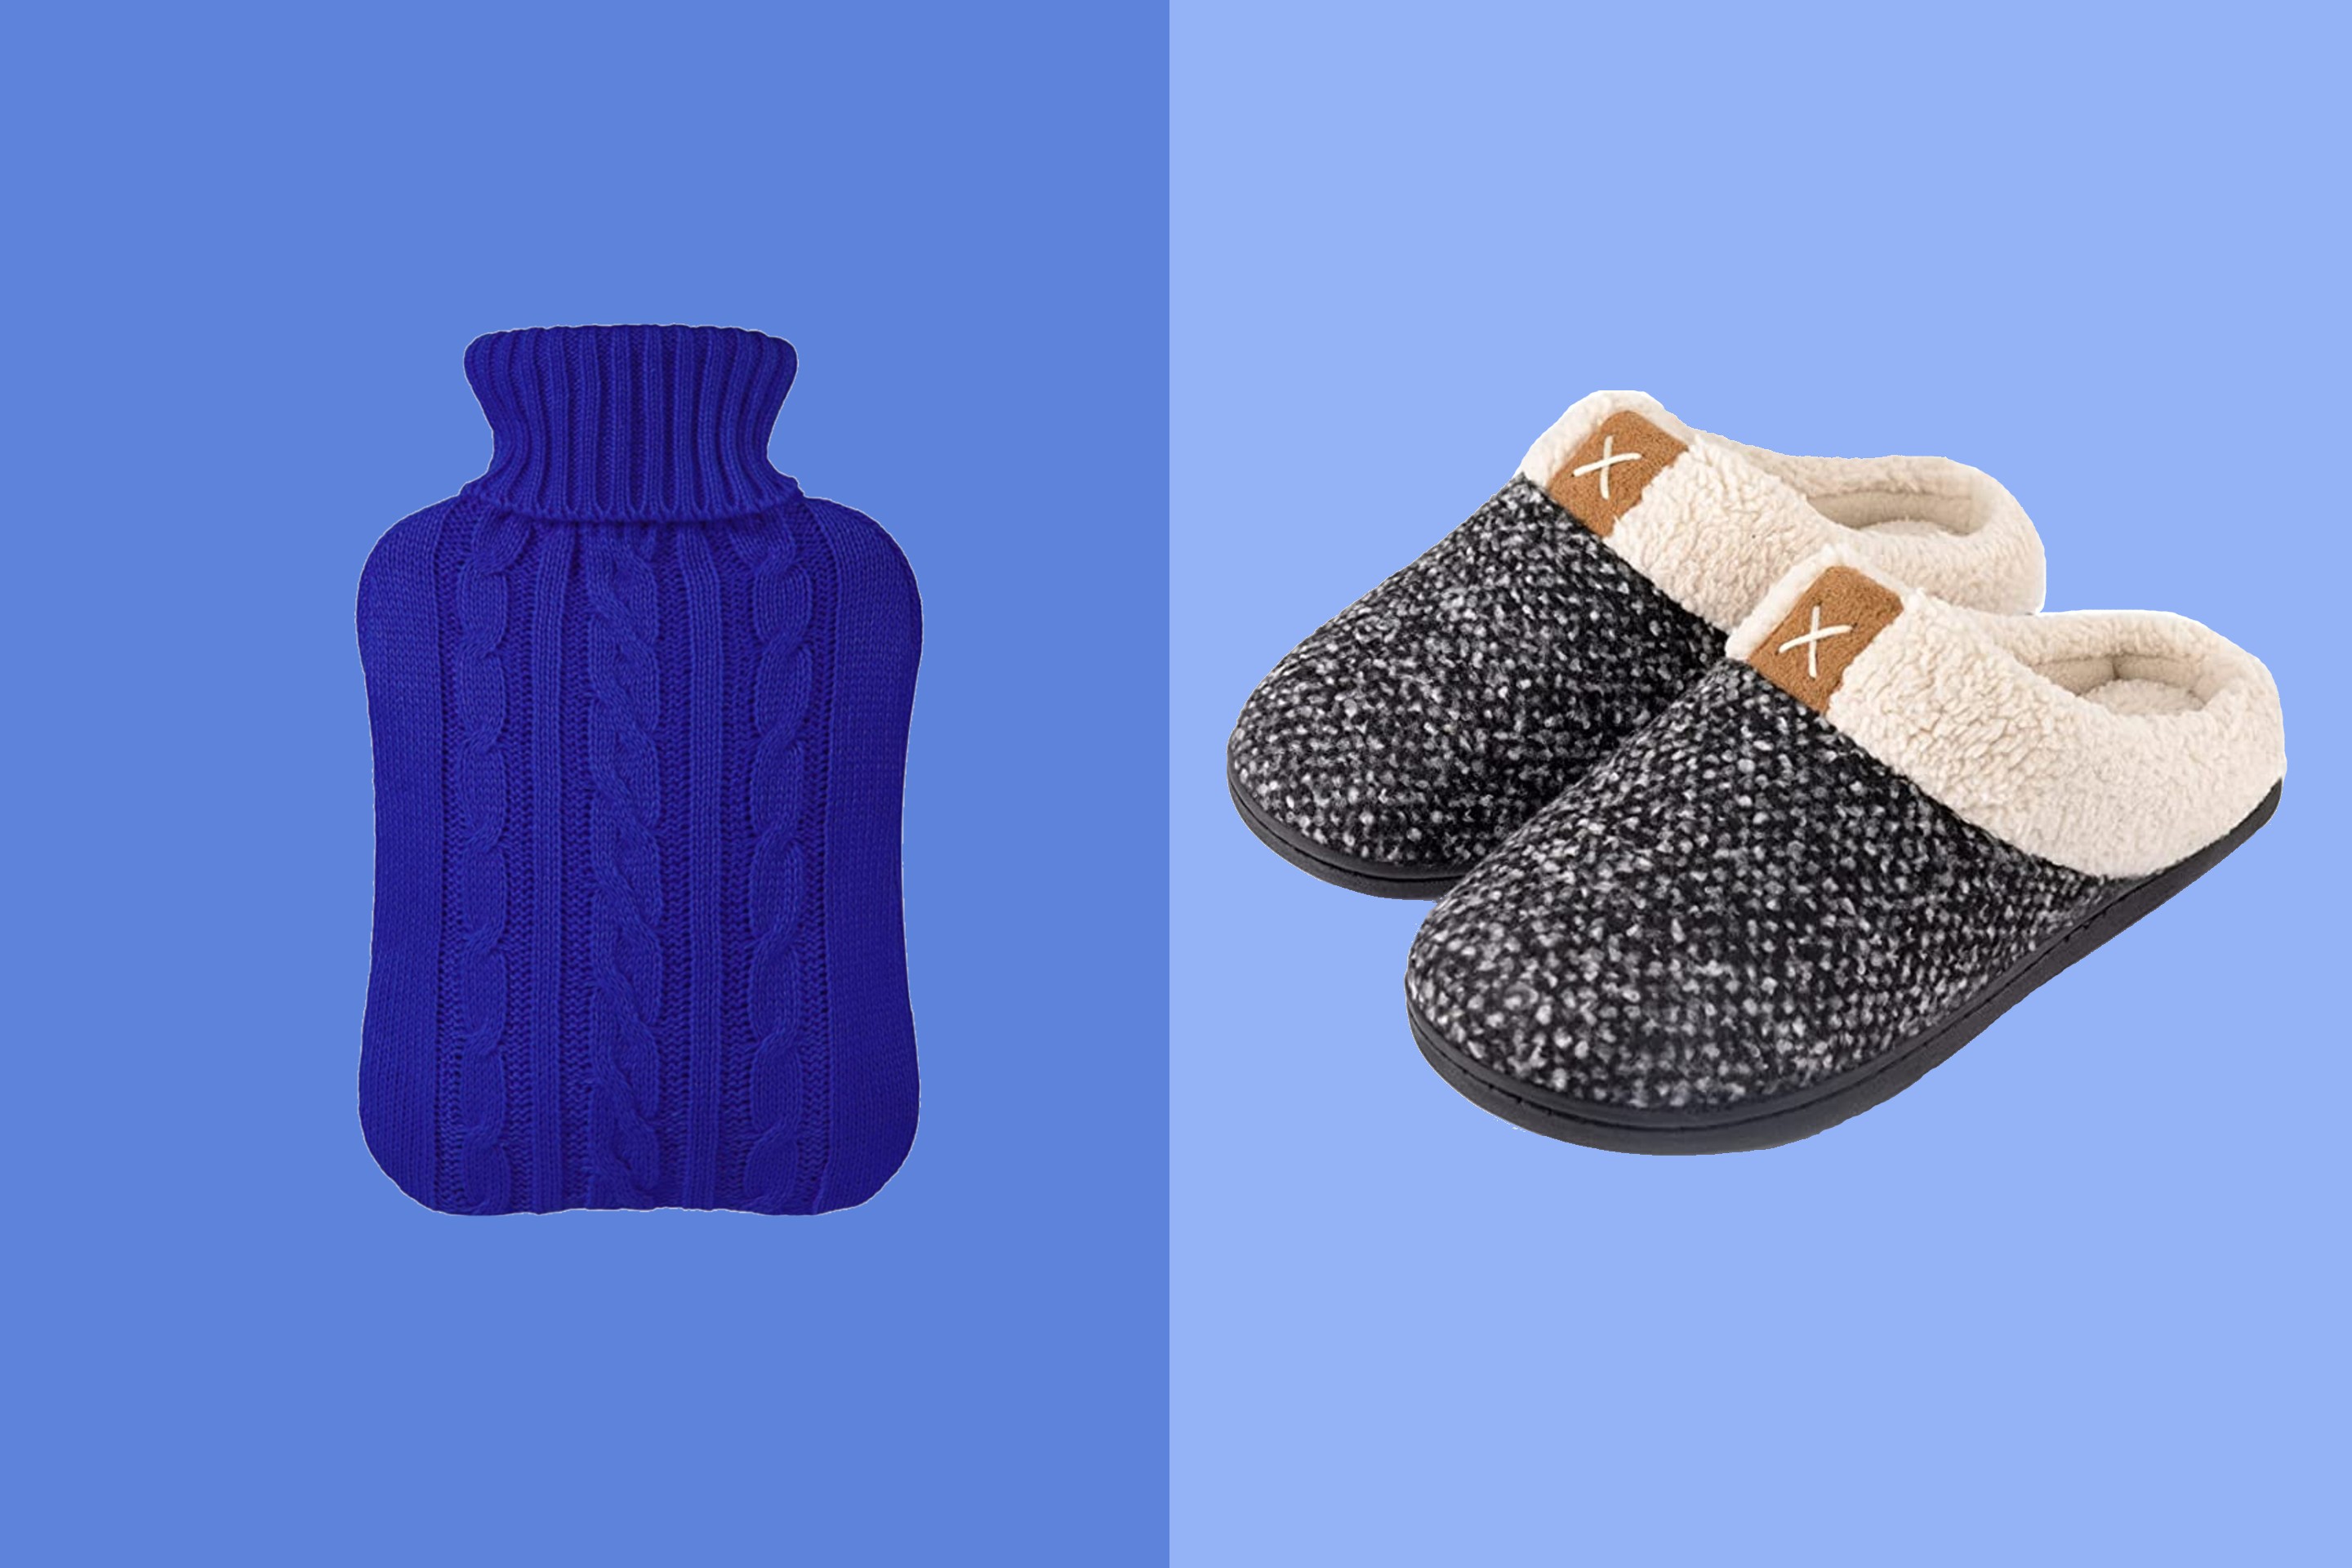 Prep for an Extra Chilly Holiday Season With These Cozy Home Essentials